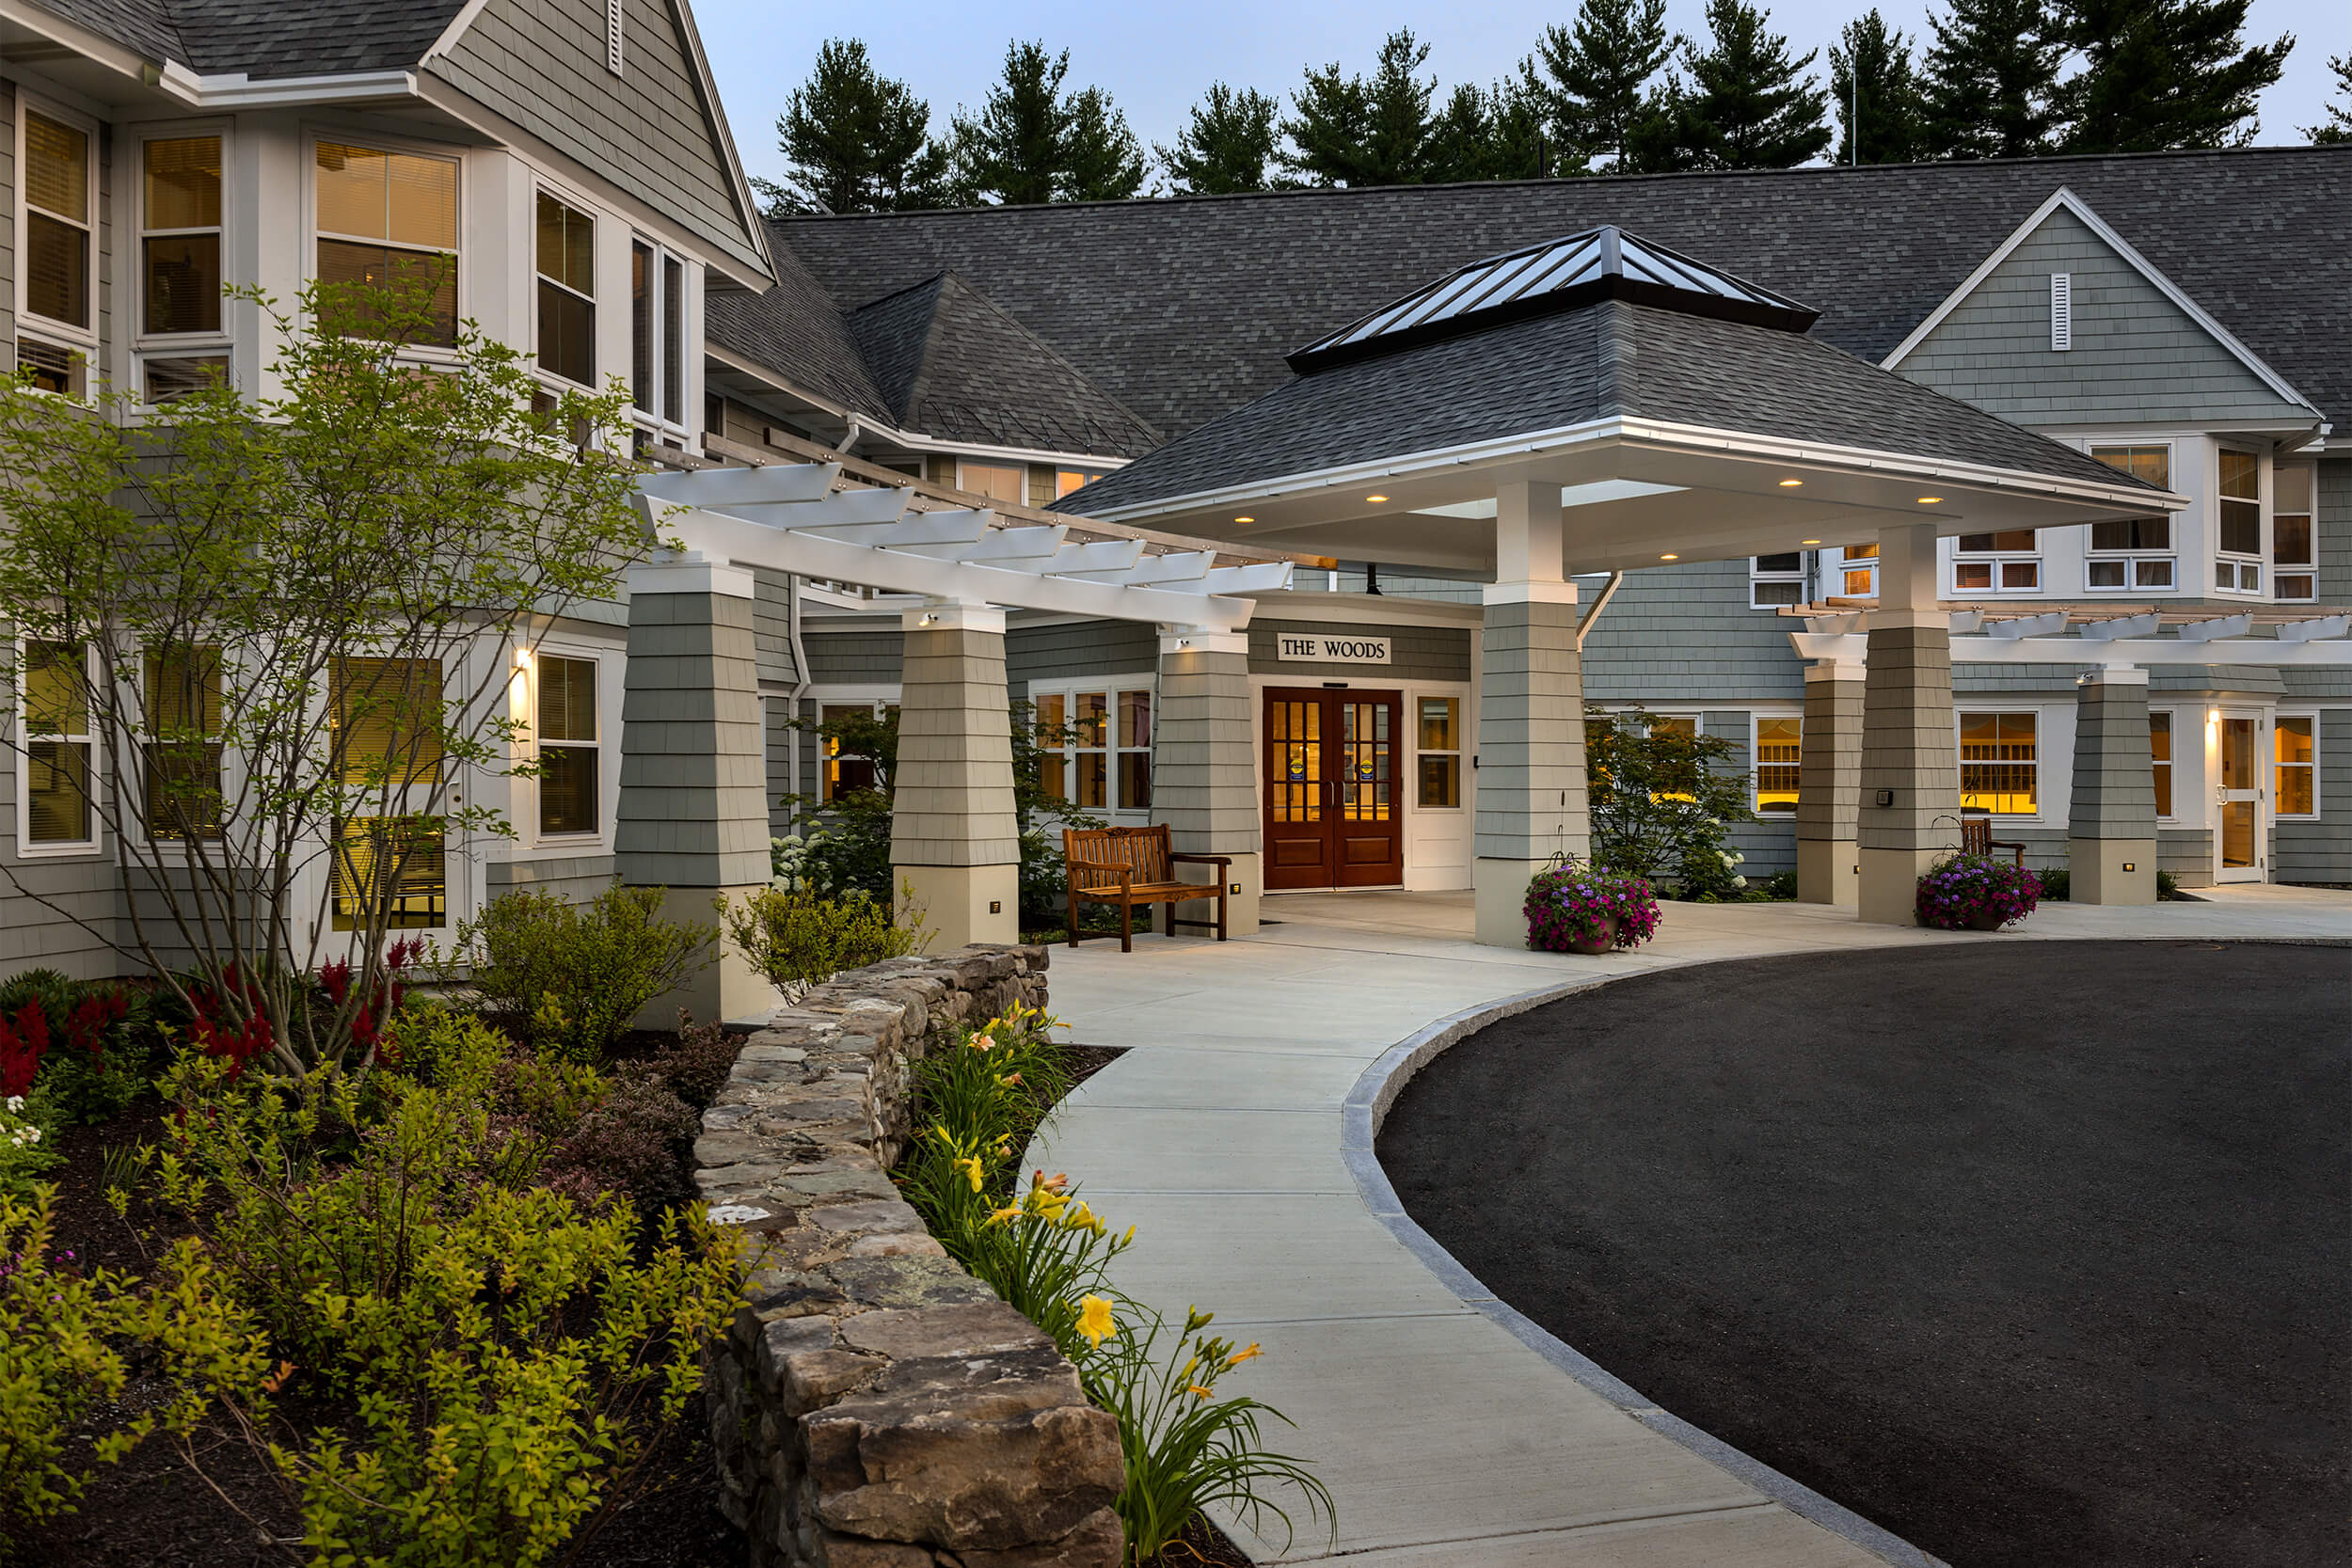 Exterior daytime photo of the entrance of a senior living facility. The building has grey siding and white trim, with plantings and mulch beds adjacent to the facade of the building and a curved driveway.